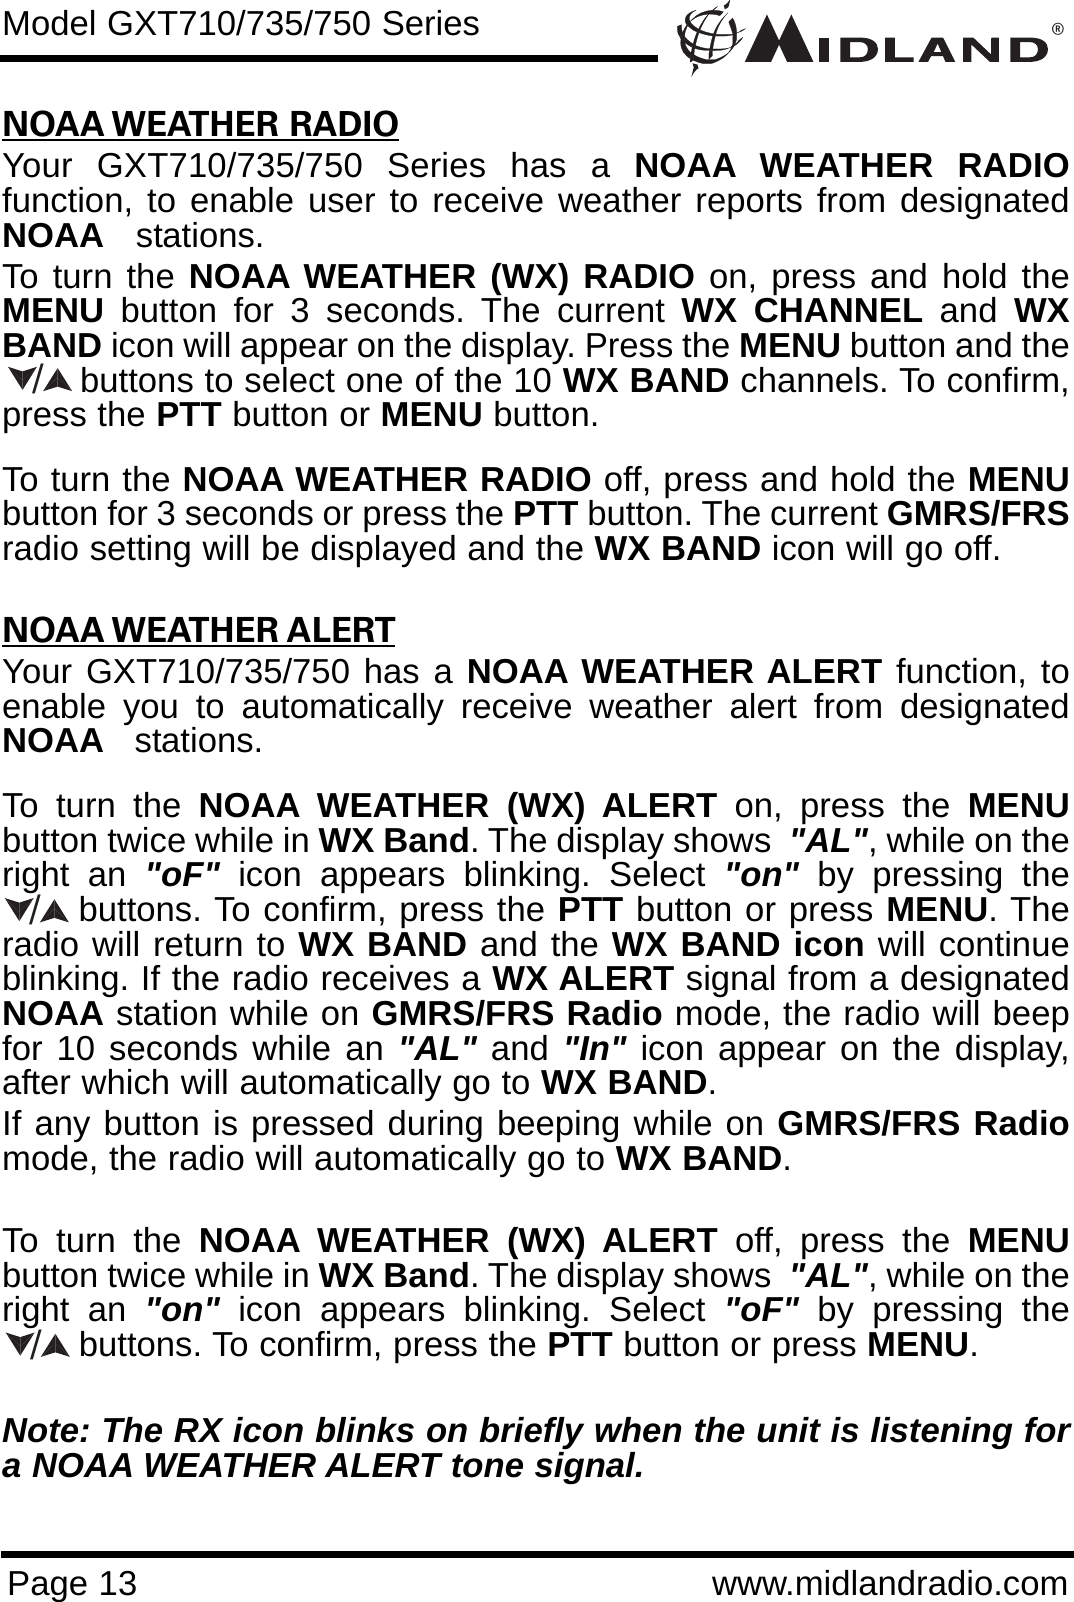 ®Page 13 www.midlandradio.comNOAA WEATHER RADIOYour GXT710/735/750 Series has a NOAA WEATHER RADIOfunction, to enable user to receive weather reports from designatedNOAA stations.To turn the NOAA WEATHER (WX) RADIO on, press and hold theMENU button for 3 seconds. The current WX CHANNEL and  WXBAND icon will appear on the display. Press the MENU button and thebuttons to select one of the 10 WX BAND channels. To confirm,press the PTT button or MENU button. To turn the NOAA WEATHER RADIO off, press and hold the MENUbutton for 3 seconds or press the PTT button. The current GMRS/FRSradio setting will be displayed and the WX BAND icon will go off.NOAA WEATHER ALERTYour GXT710/735/750 has a NOAA WEATHER ALERT function, toenable you to automatically receive weather alert from designatedNOAA stations. To turn the NOAA WEATHER (WX) ALERT on, press the MENUbutton twice while in WX Band. The display shows  &quot;AL&quot;, while on theright an &quot;oF&quot; icon appears blinking. Select &quot;on&quot; by pressing thebuttons. To confirm, press the PTT button or press MENU. Theradio will return to WX BAND and the WX BAND icon will continueblinking. If the radio receives a WX ALERT signal from a designatedNOAA station while on GMRS/FRS Radio mode, the radio will beepfor 10 seconds while an &quot;AL&quot; and &quot;In&quot; icon appear on the display,after which will automatically go to WX BAND. If any button is pressed during beeping while on GMRS/FRS Radiomode, the radio will automatically go to WX BAND.To turn the NOAA WEATHER (WX) ALERT off, press the MENUbutton twice while in WX Band. The display shows  &quot;AL&quot;, while on theright an &quot;on&quot; icon appears blinking. Select &quot;oF&quot; by pressing thebuttons. To confirm, press the PTT button or press MENU.Note: The RX icon blinks on briefly when the unit is listening fora NOAA WEATHER ALERT tone signal.Model GXT710/735/750 Series///